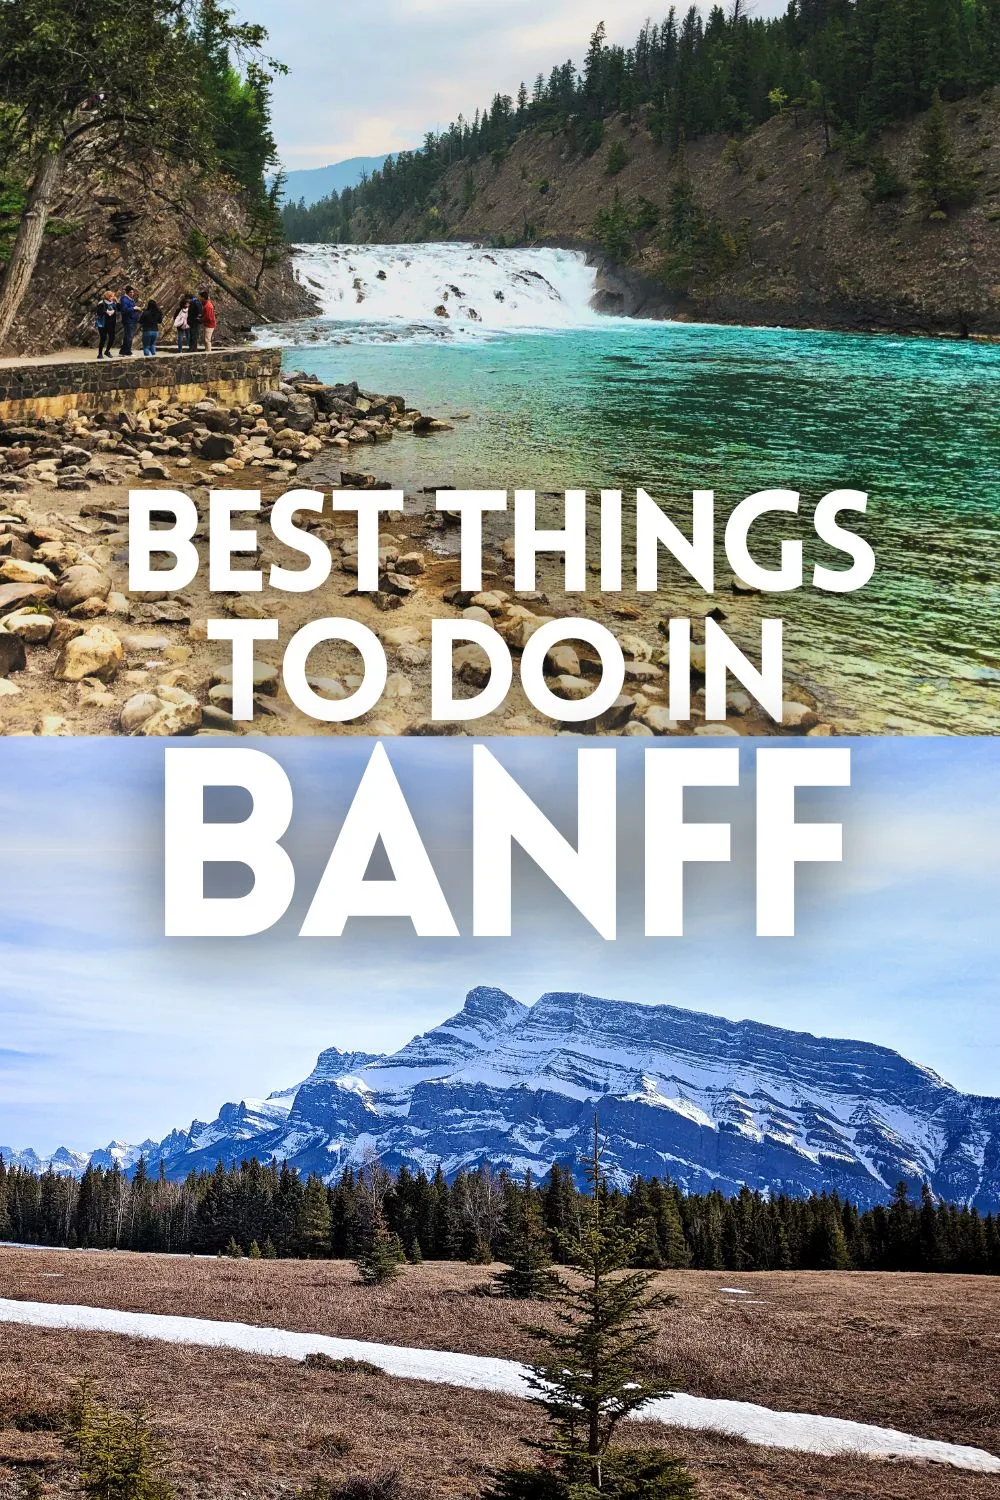 Despite its popularity, there are lots of great things to do in Banff without crowds. Between unique Banff activities and exploring the Canmore area, see what adventures you can enjoy easily in the Canadian Rockies.